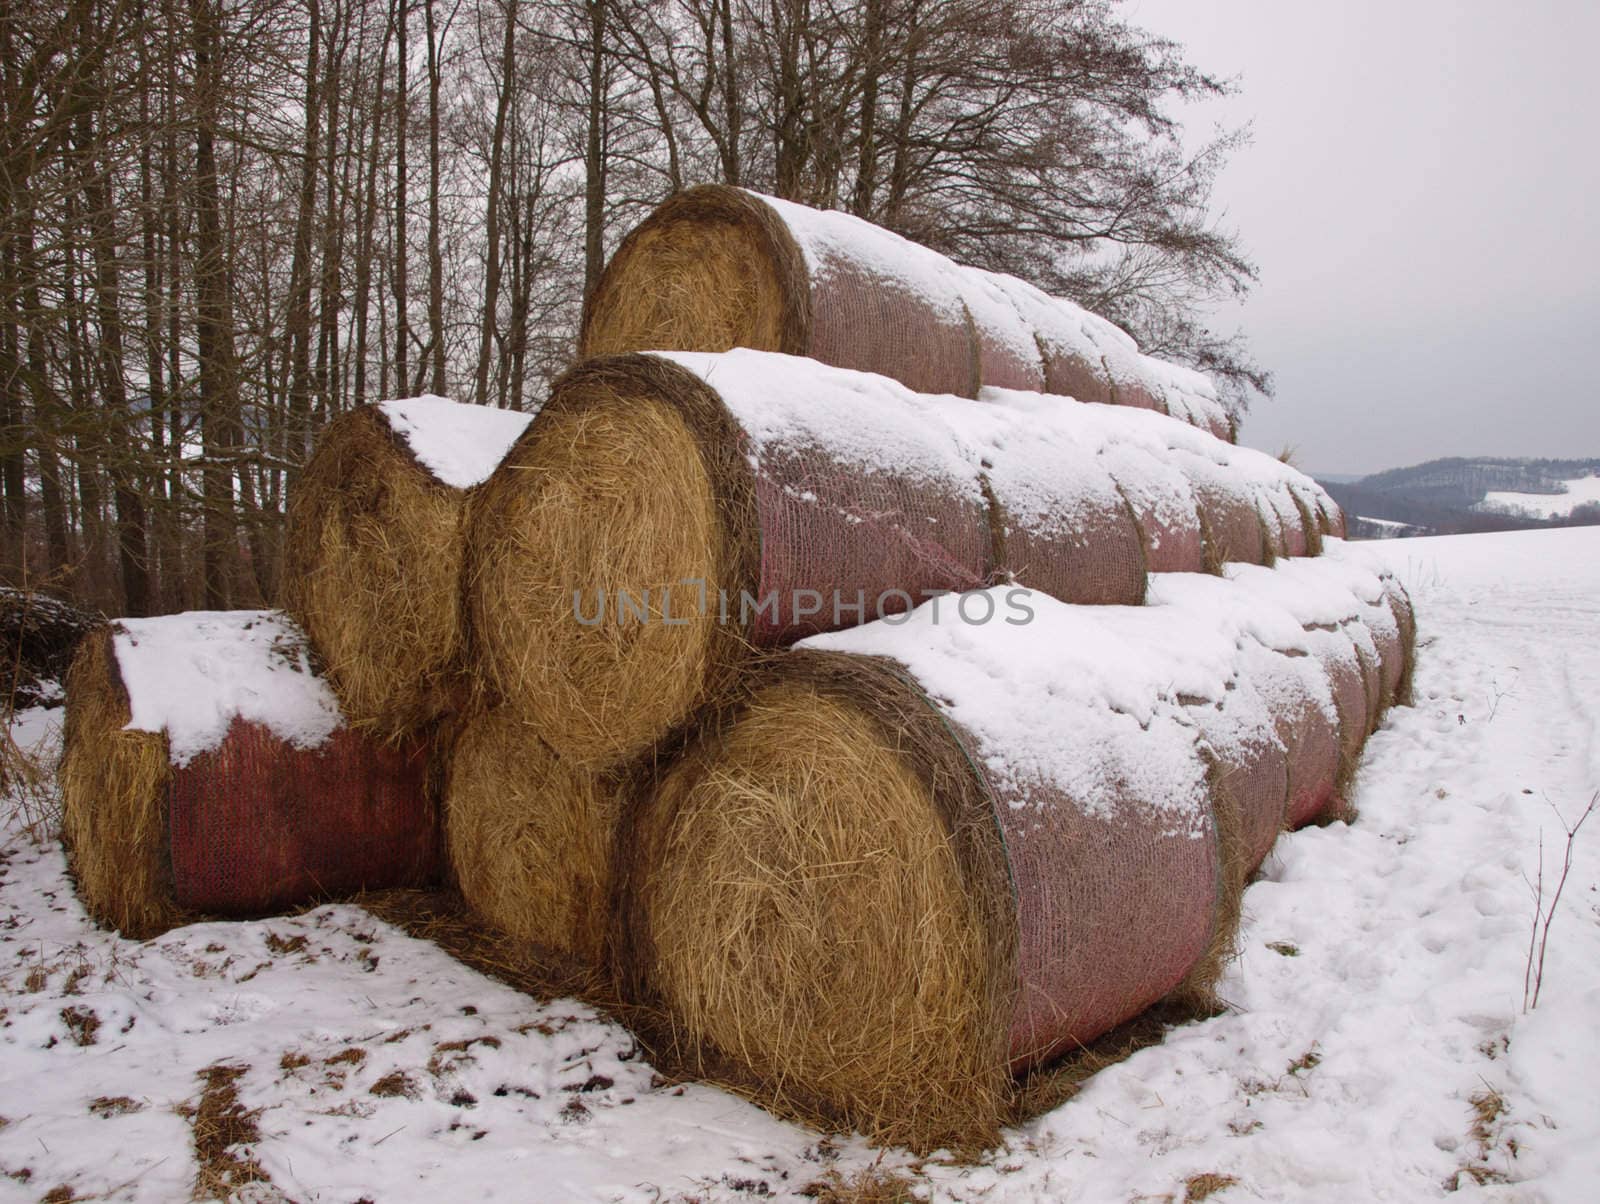 a bale of hay in winter, this is reserve till the spring is starting